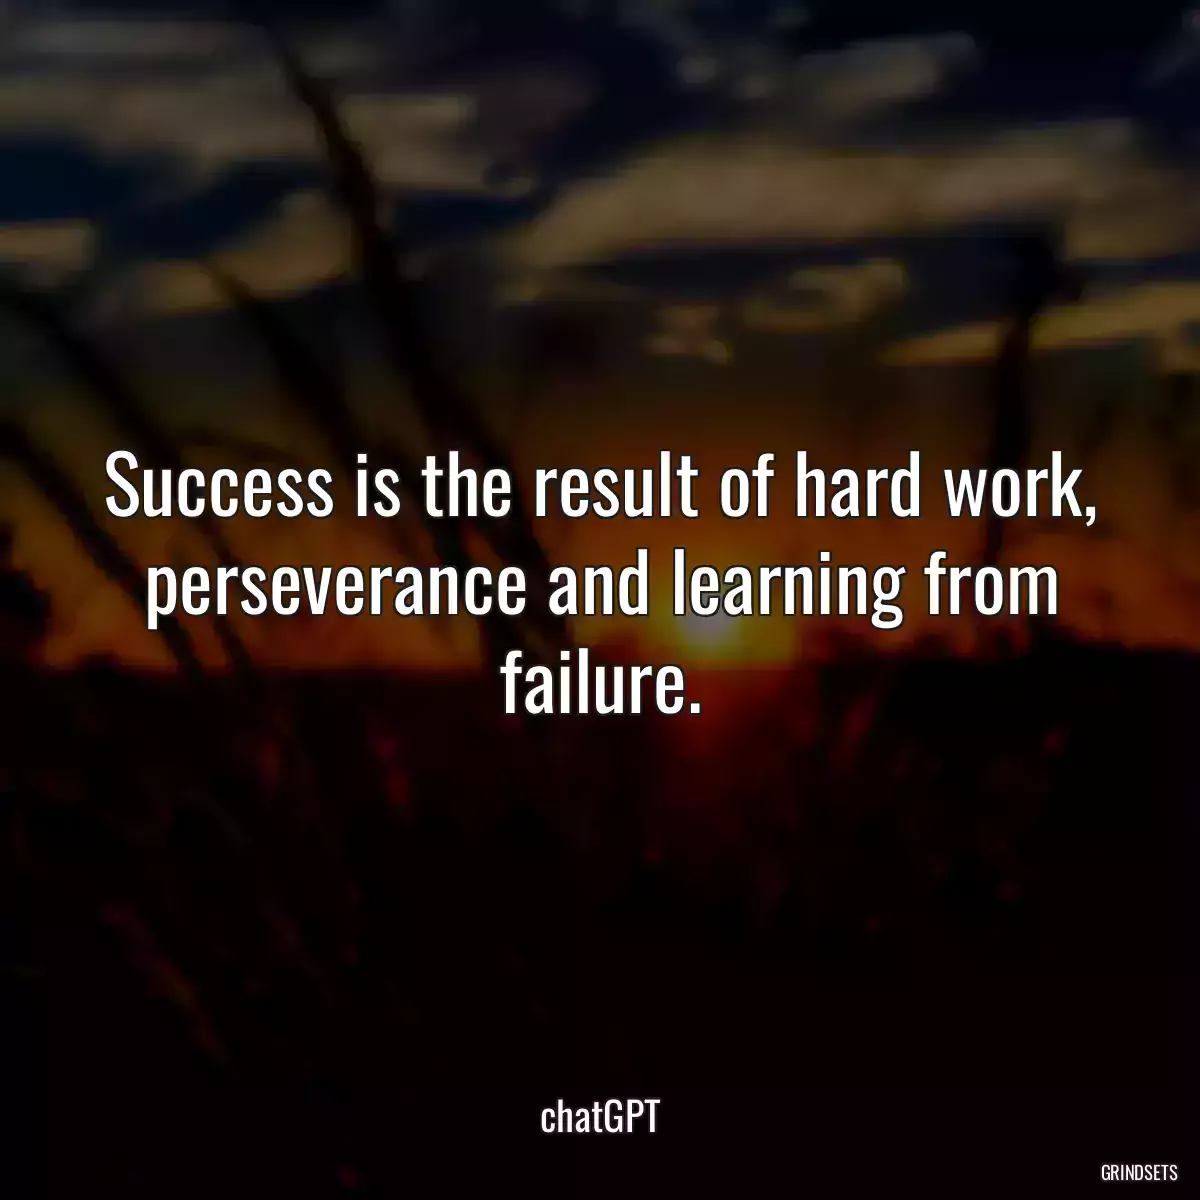 Success is the result of hard work, perseverance and learning from failure.